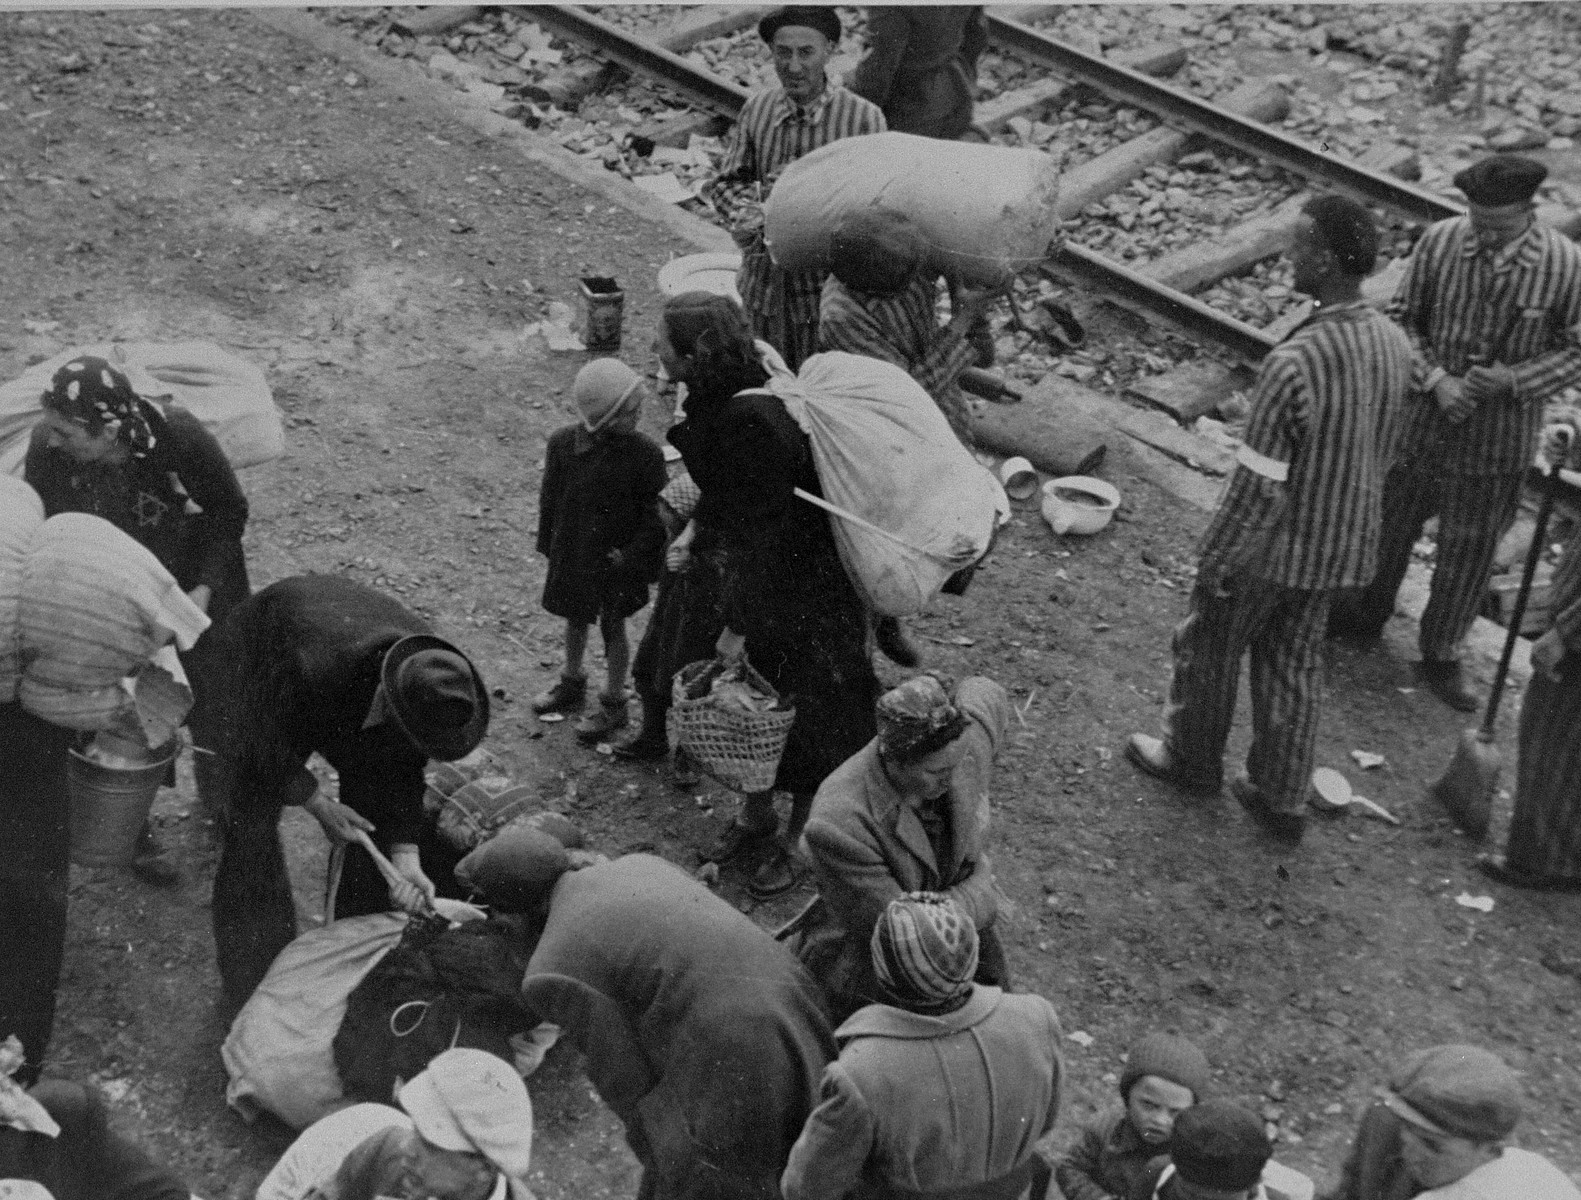 New arrivals to Auschwitz from Subcarpathian Rus attend to their personal belongings.